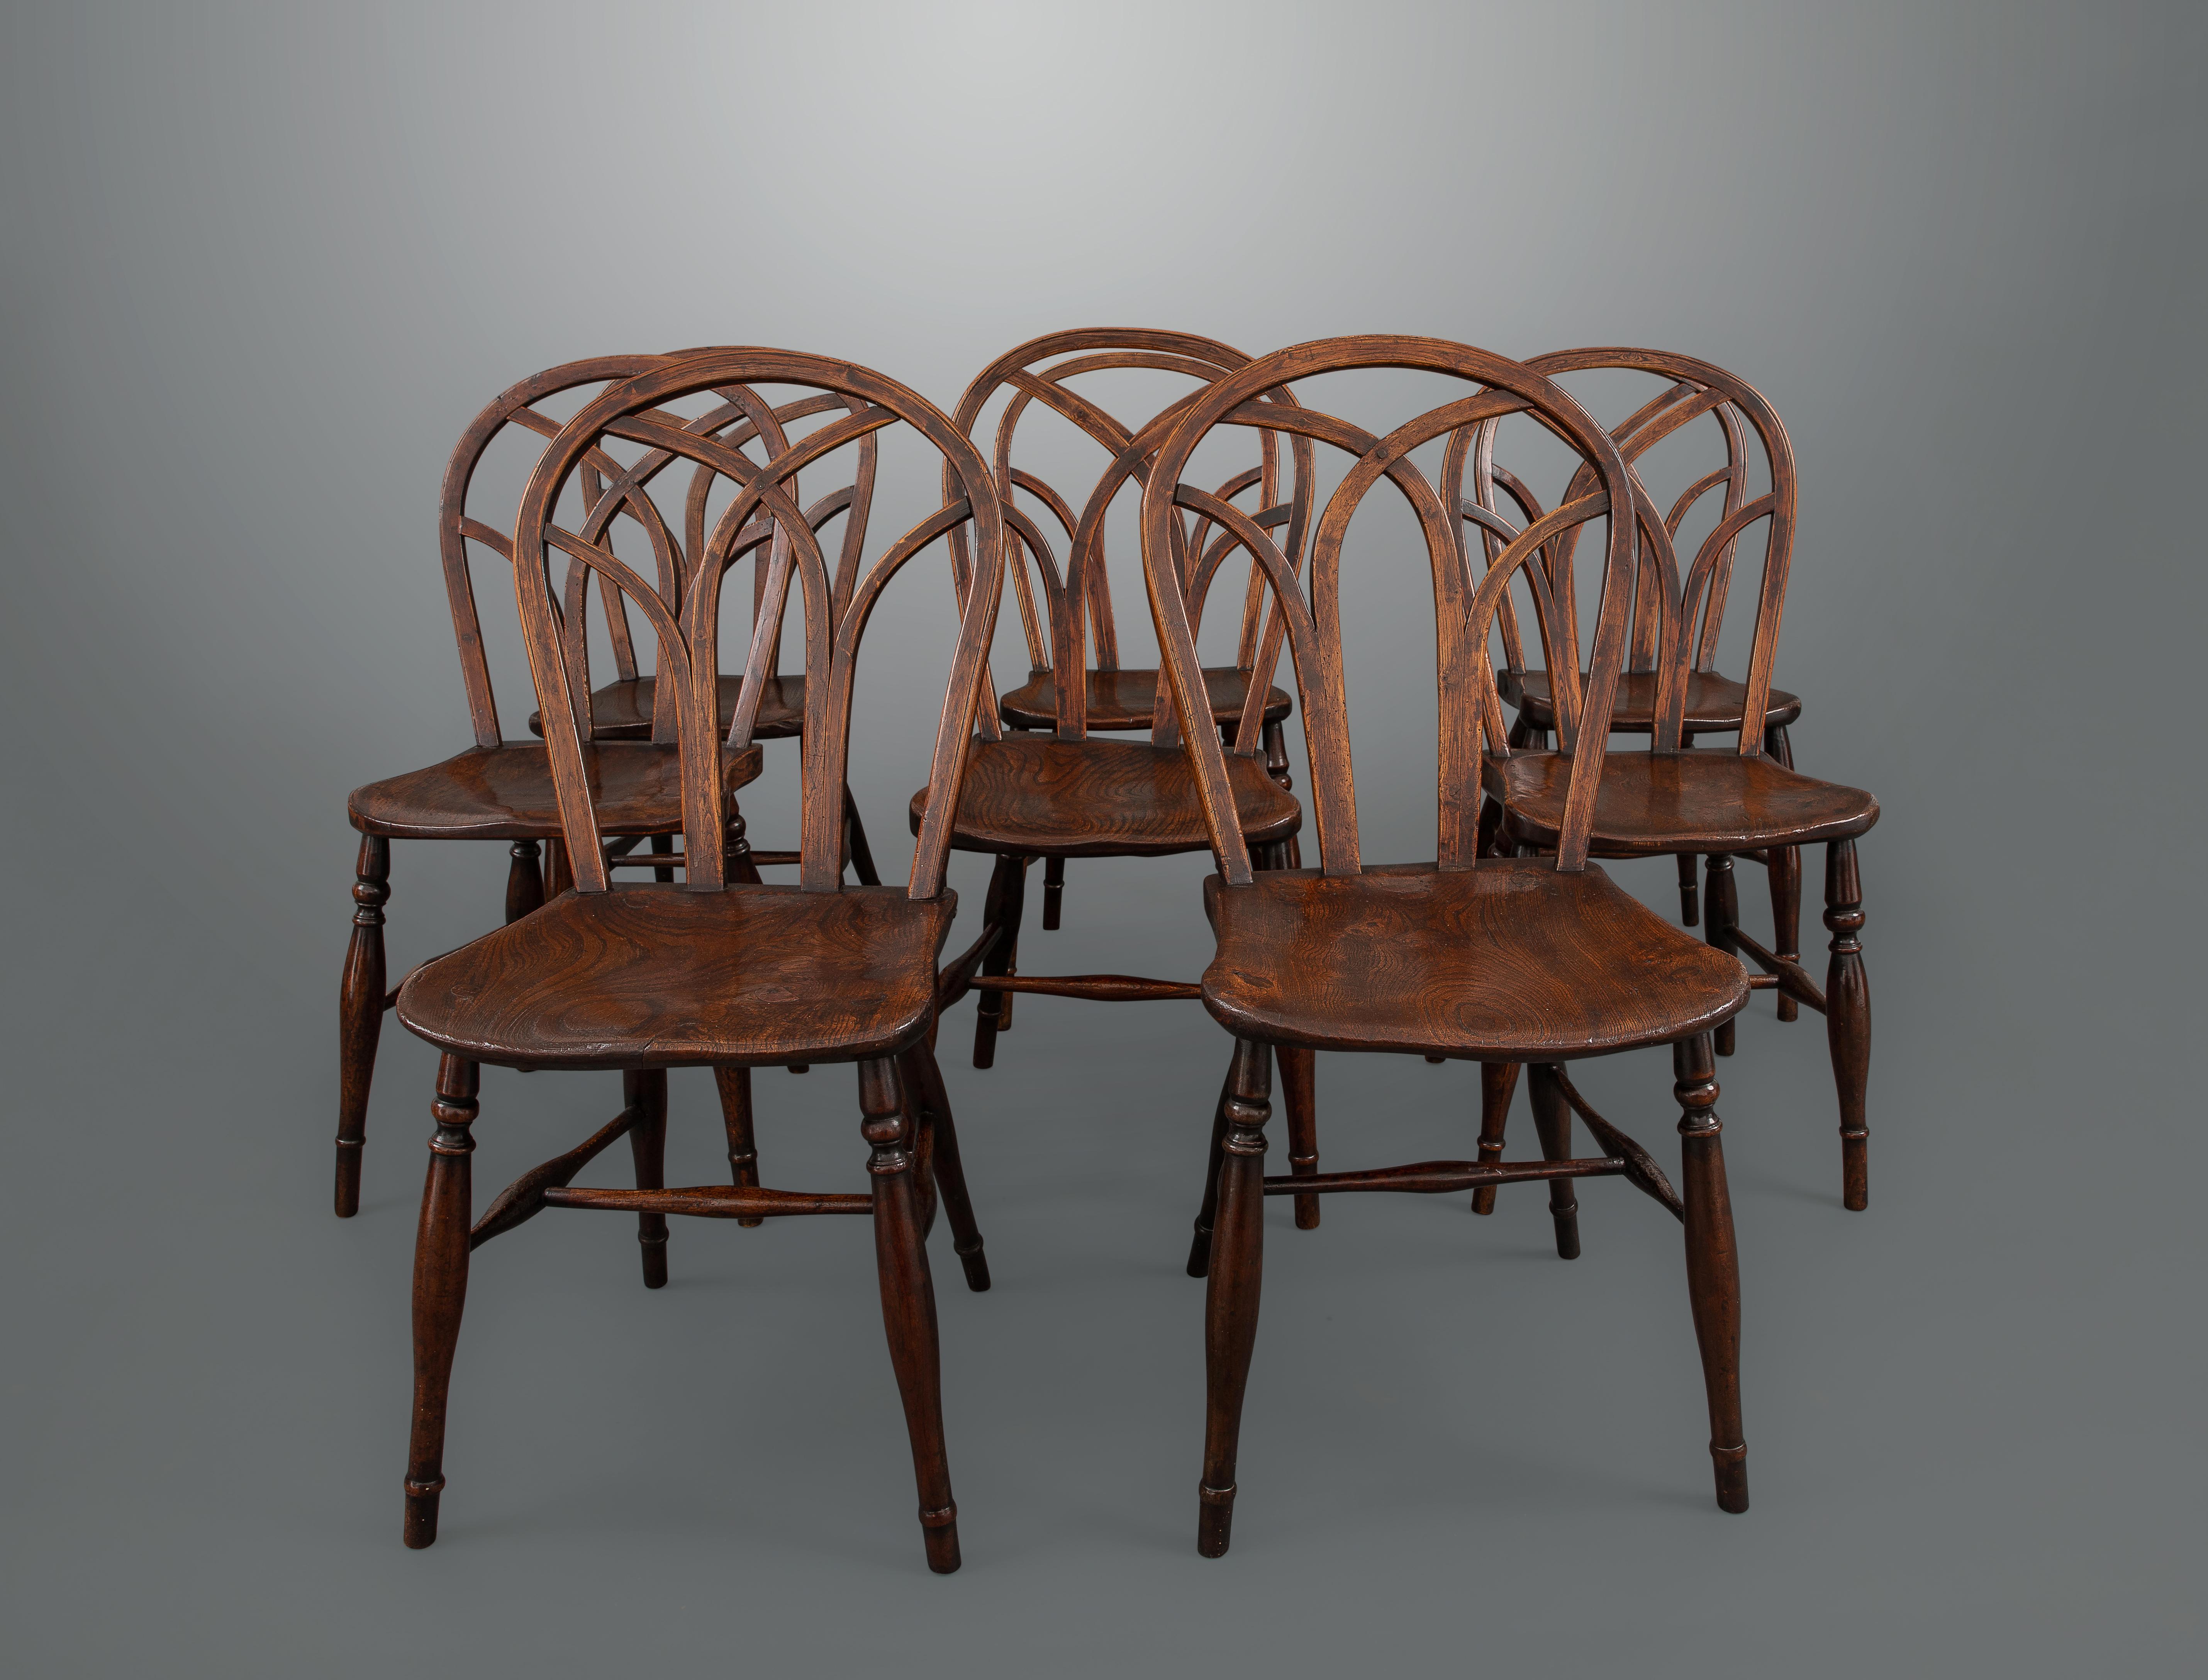 All in beech with ash backs and elm seats, five of the chairs are stamped with the makers initials T. B. Each chair has single ring and concave turned legs with lower ring and straight turned feet with the legs connected by H-form elliptical turned